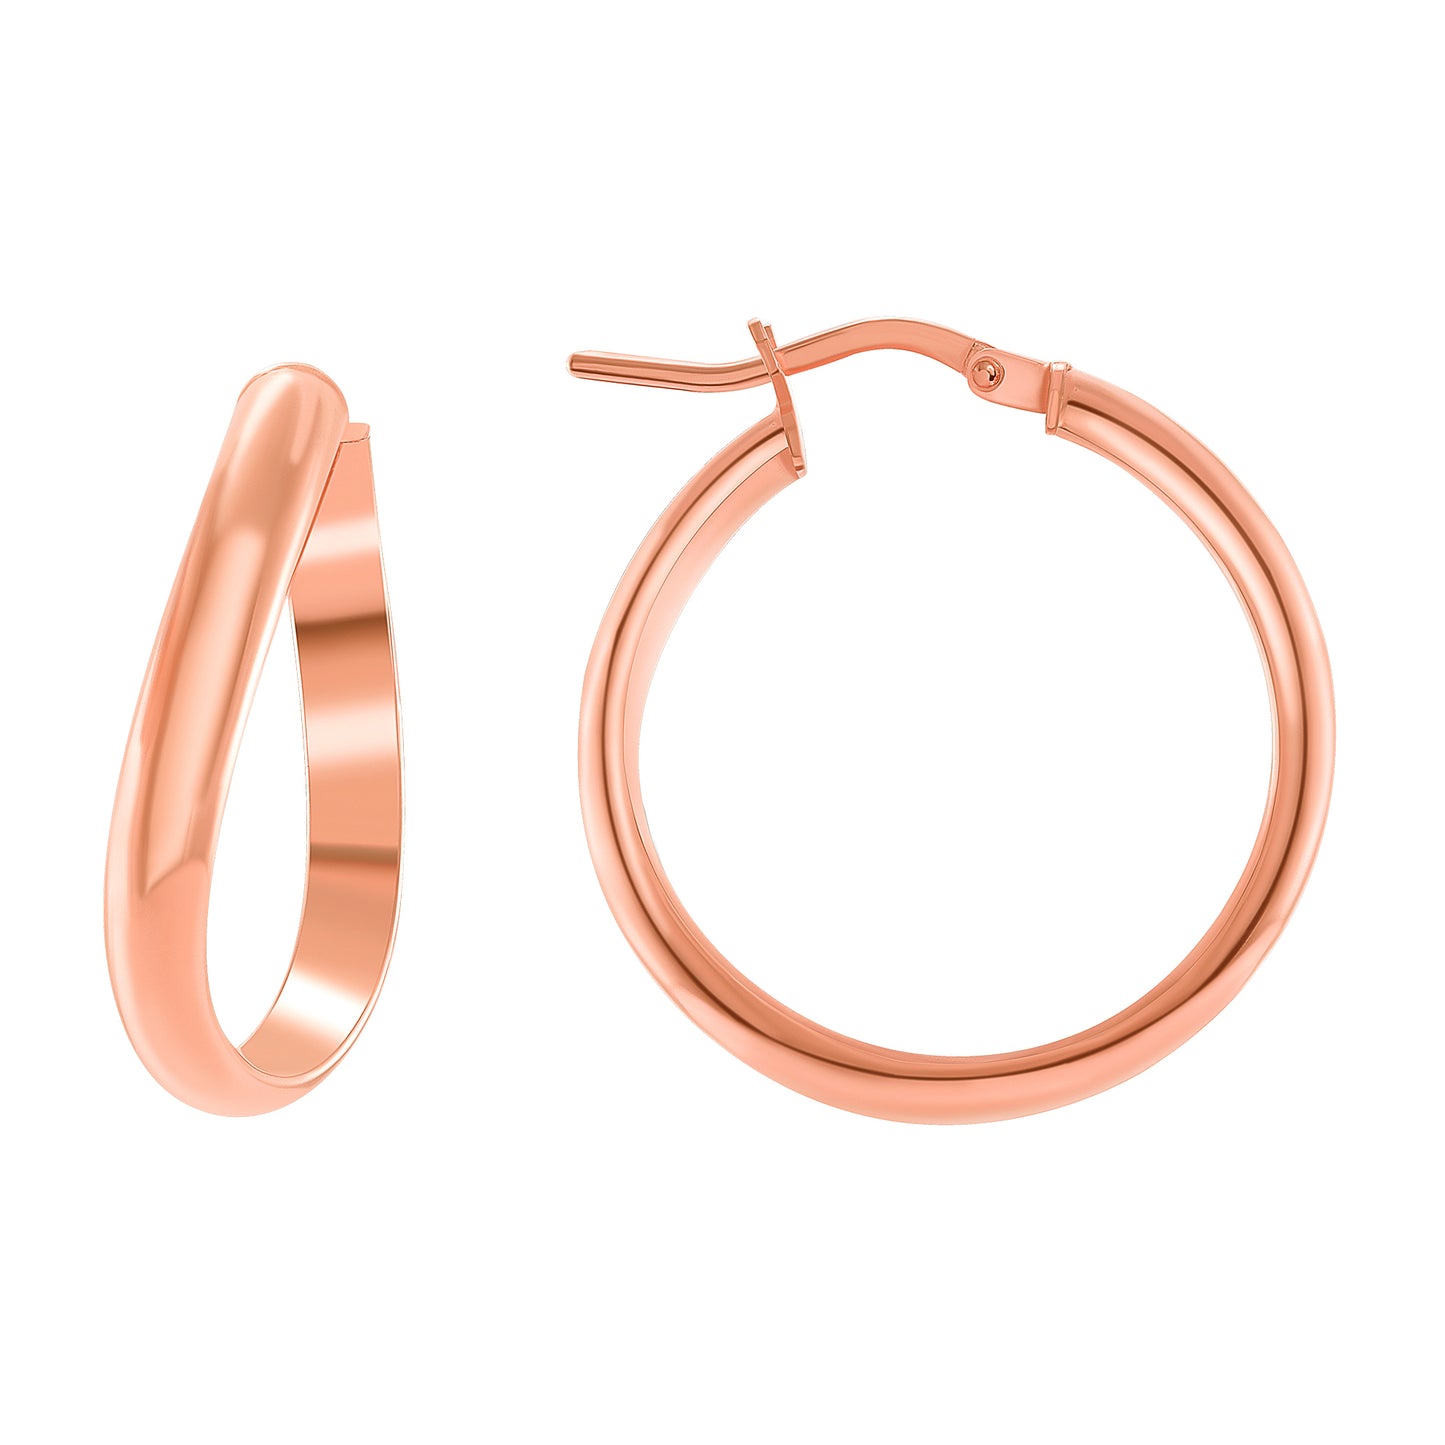 Silver 925 Rose Gold Plated Concave 4MM X 20 MM Plain Hoop Earring. ITHP43-20MRG